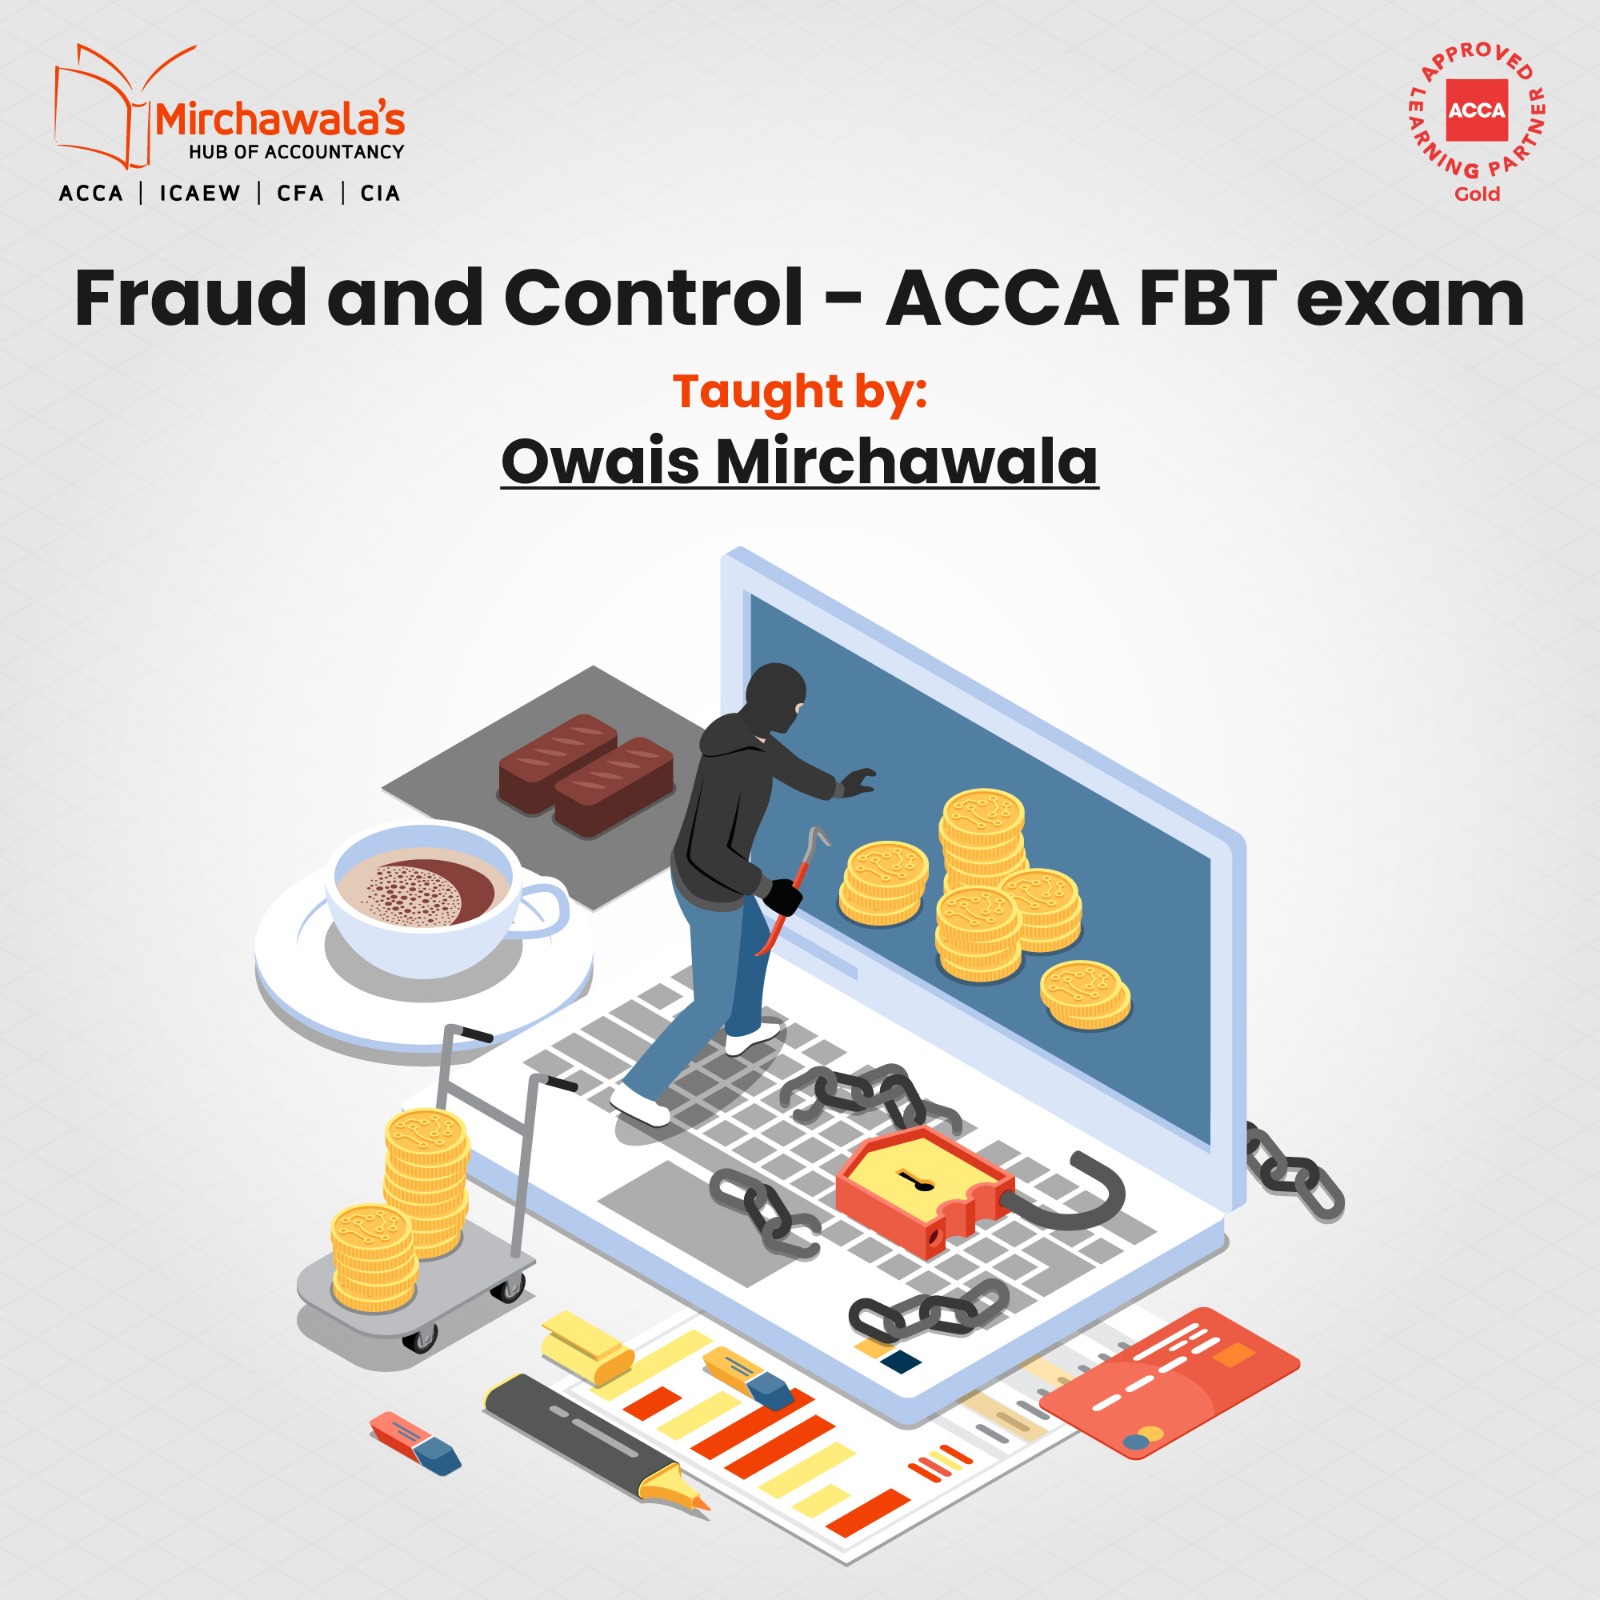 Fraud And Controls in the Business – Different Types of Frauds and How to Prevent Them in ACCA FBT